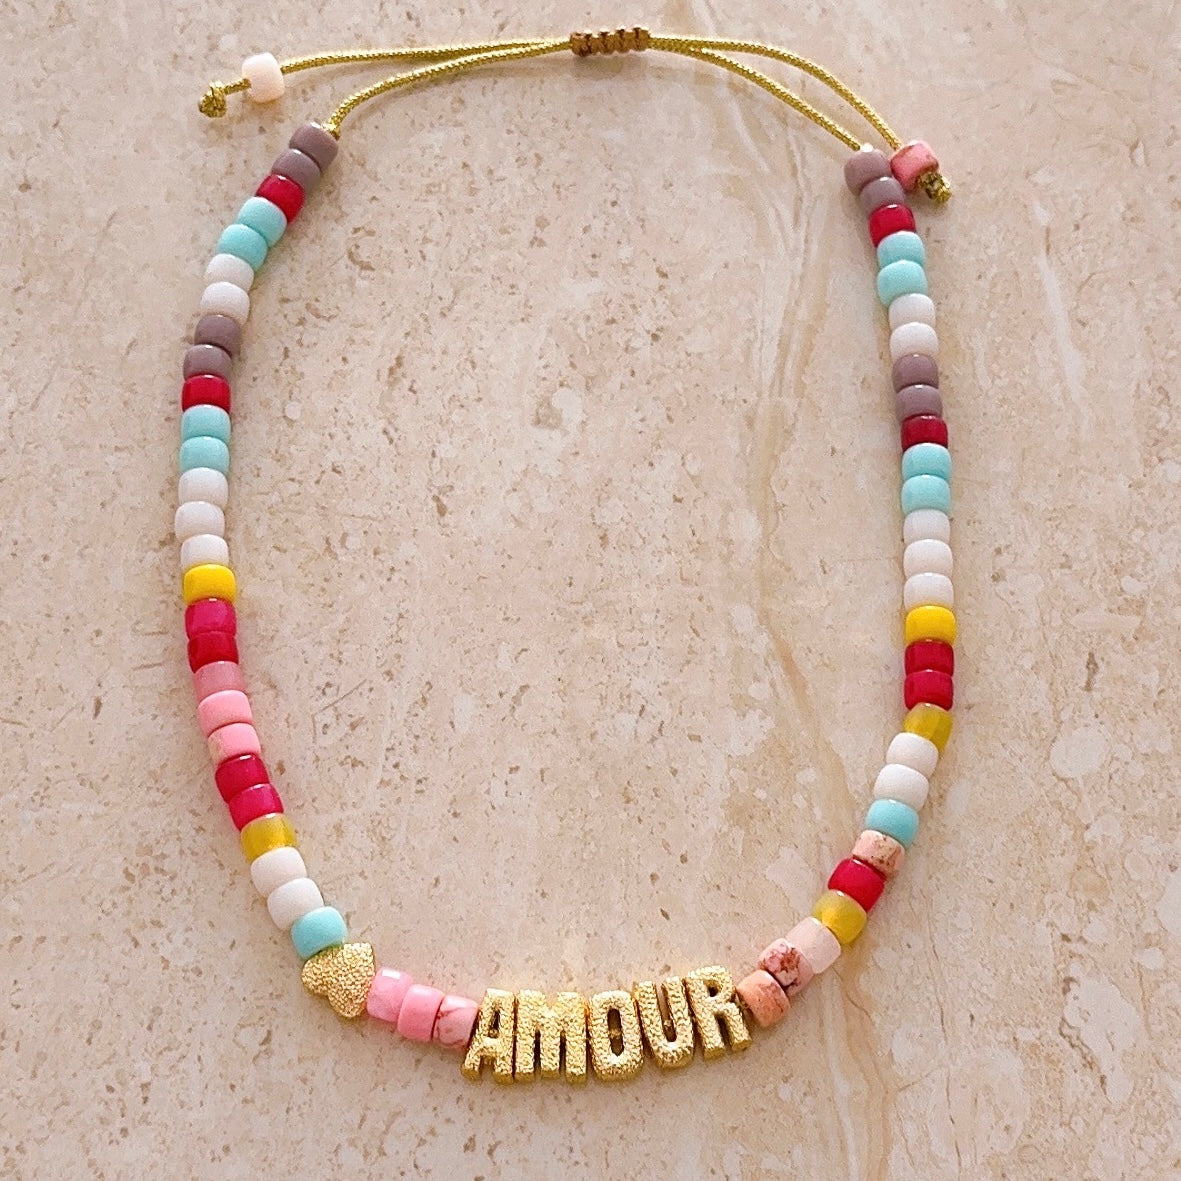 AMOUR Necklace Rose Quartz, Opal, Selenite and agate. Healing properties: Love, Passion, Femininity, Healing and Positivity, shop the best gift gifts for her for him from Inna carton online store dubai, UAE!